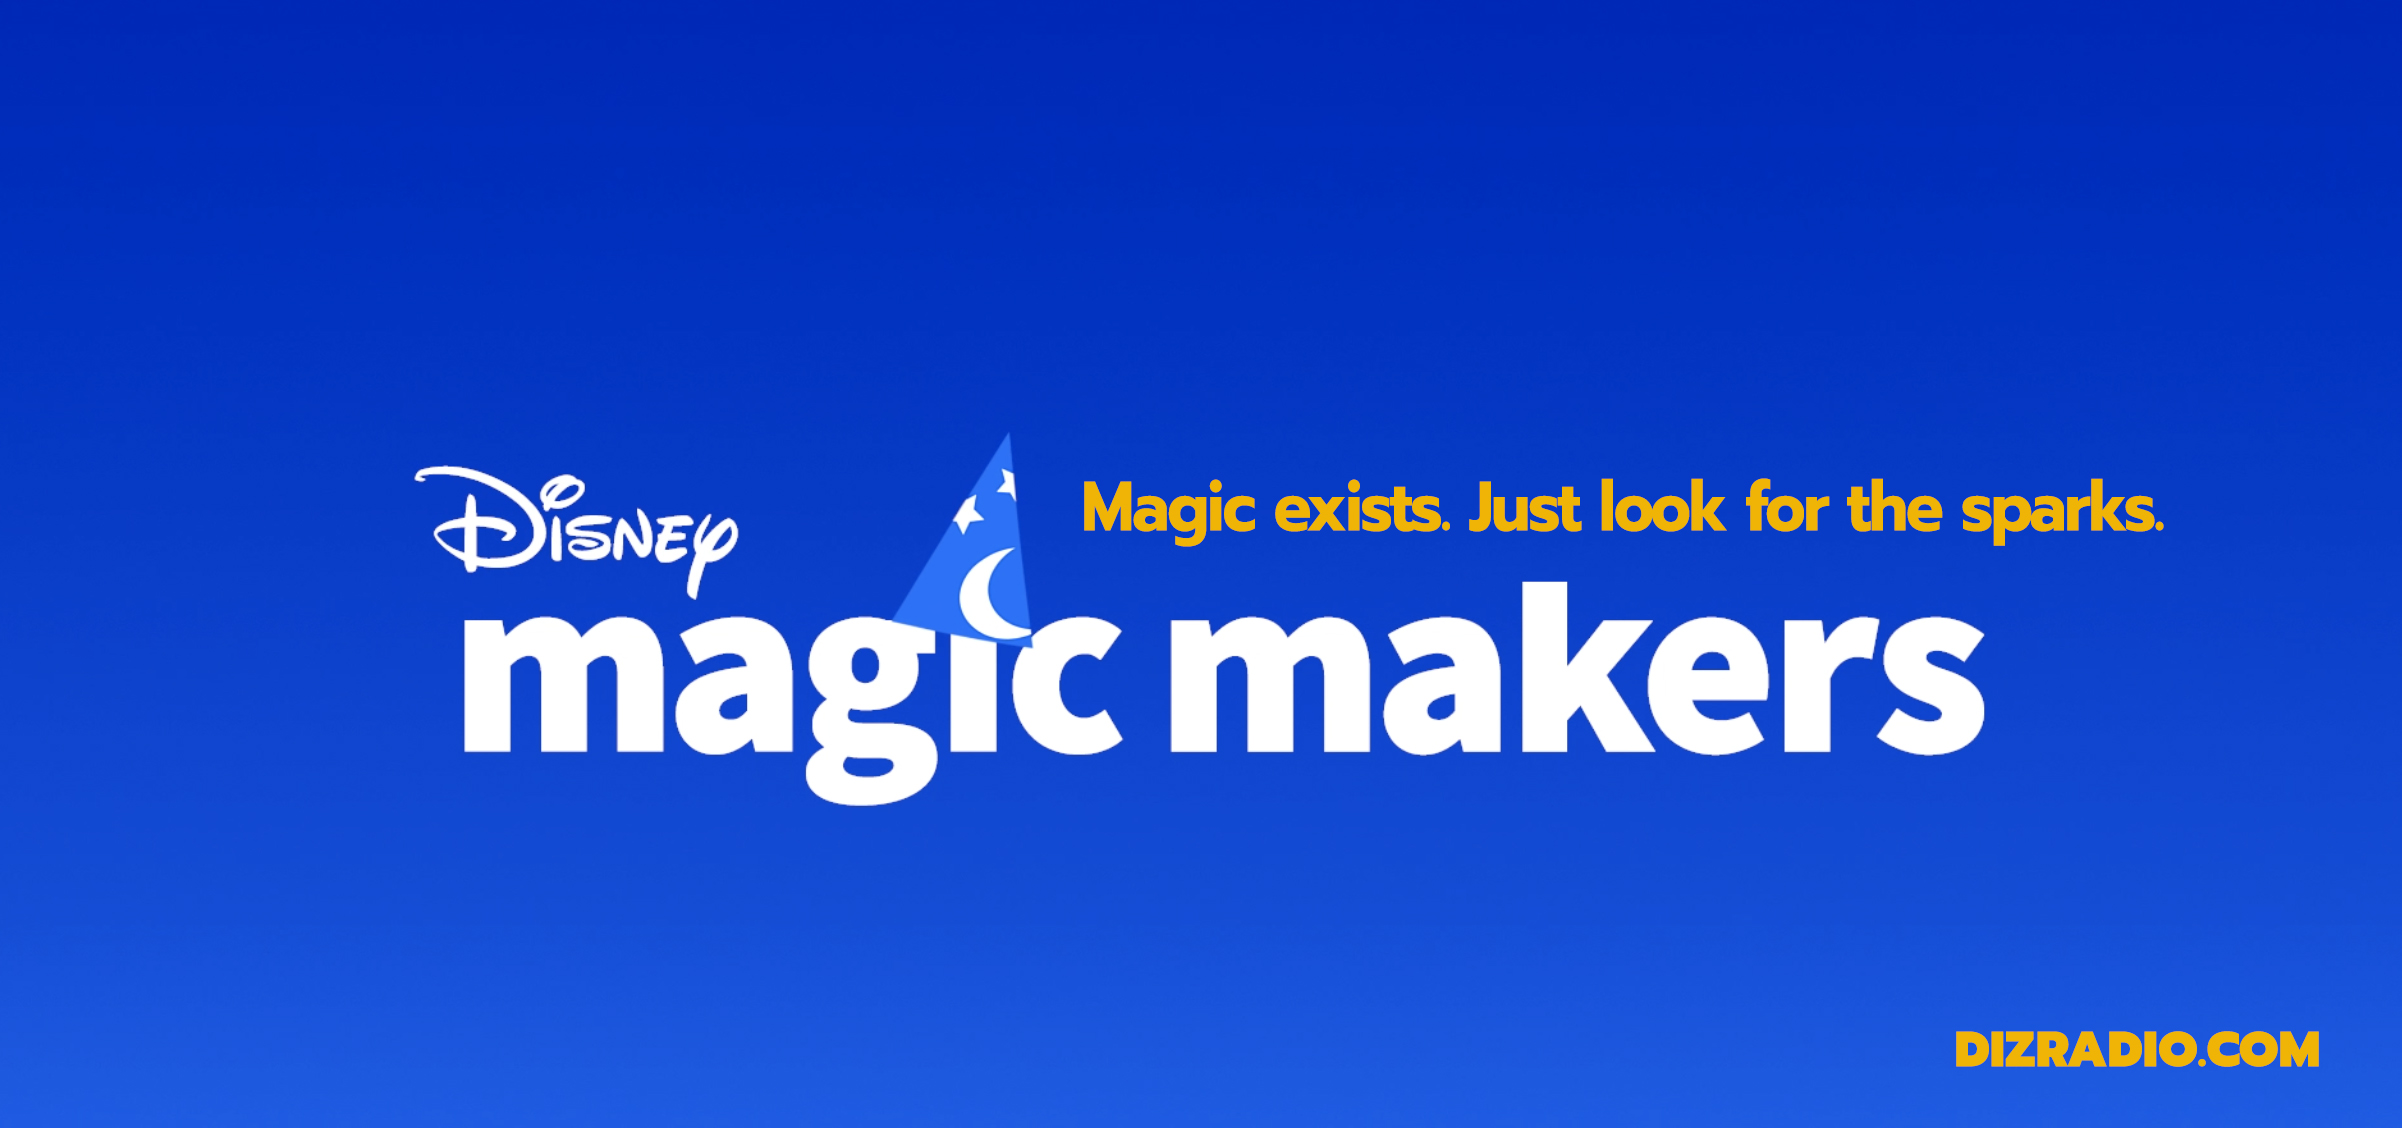 Nationwide Search Begins for #DisneyMagicMakers to Reward Those Who Make Magic in Their Communities